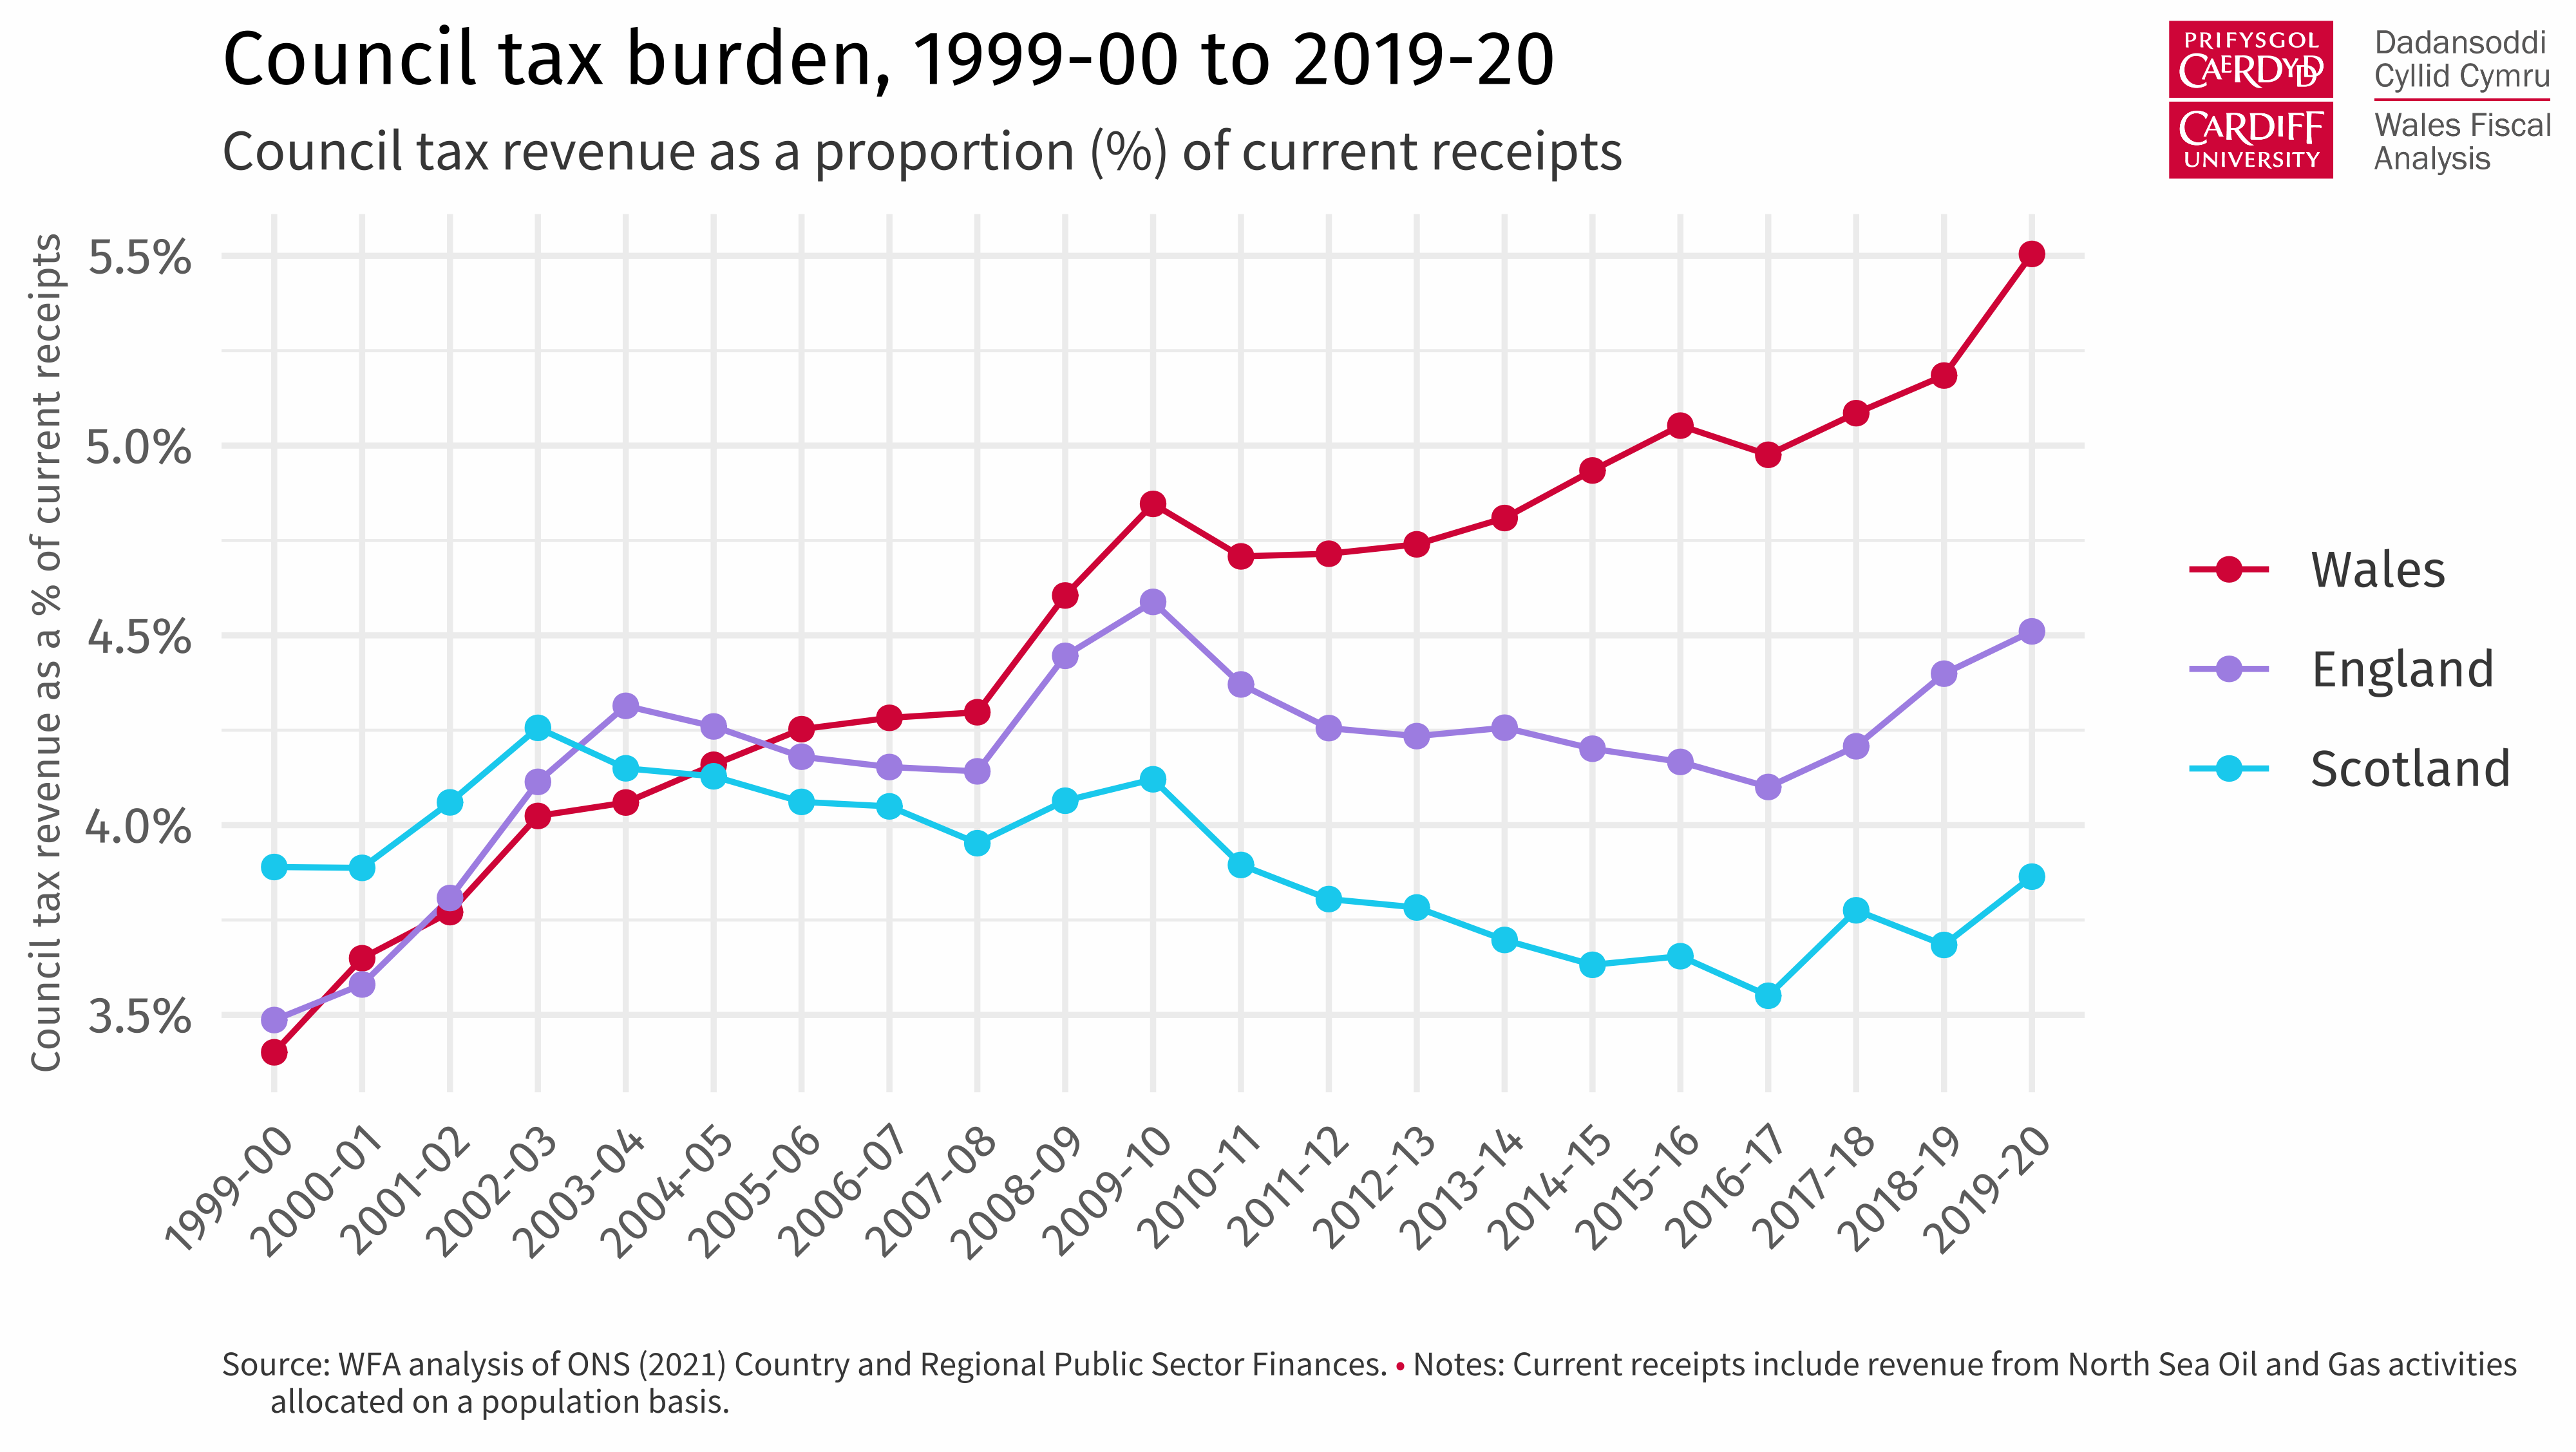 Line chart plotting council tax revenues as a share of current receipts since 1999-00 in Wales, England, and Scotland.